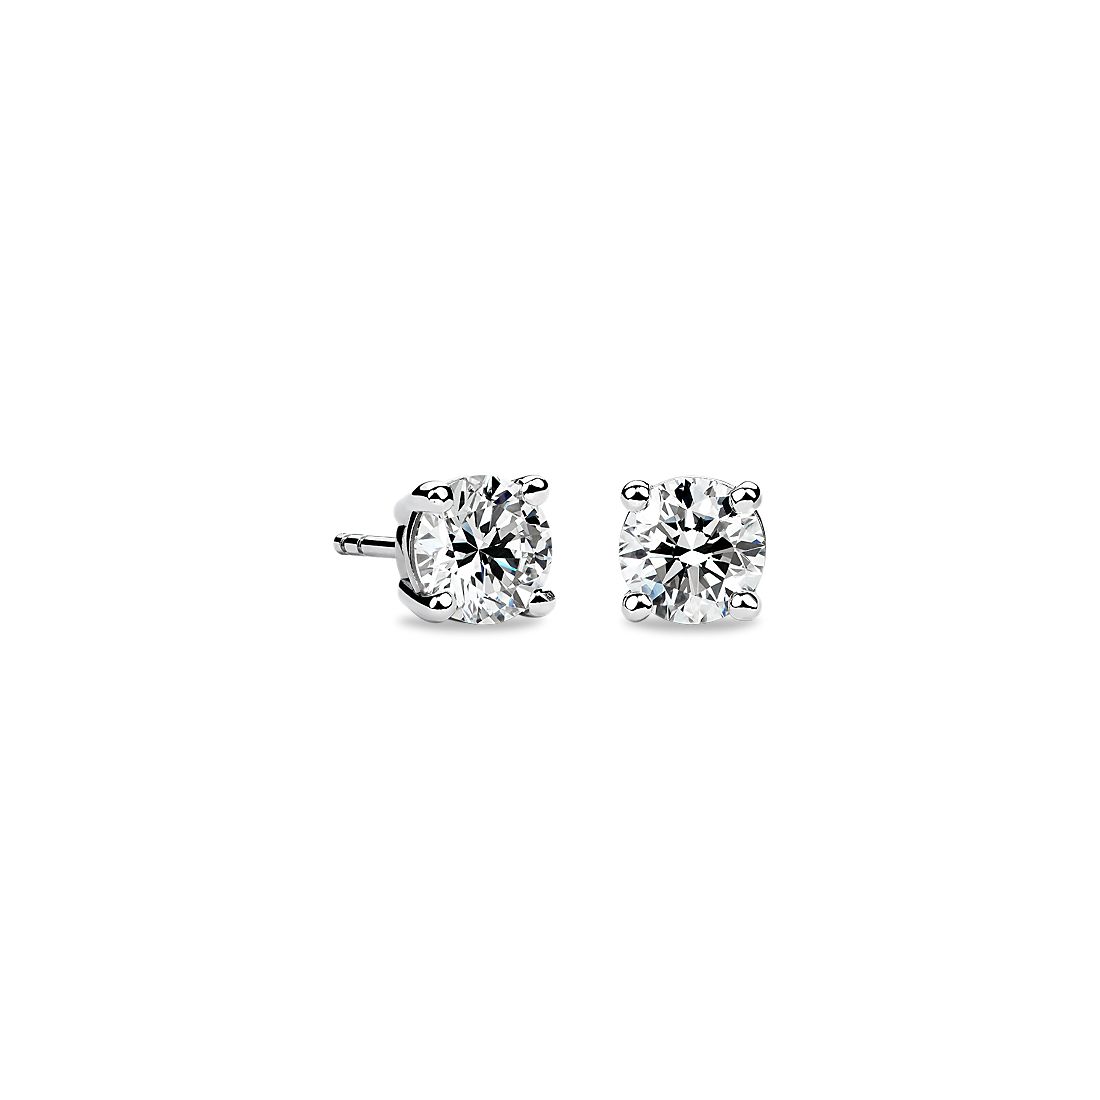 14k White Gold Four-Claw Diamond Stud Earrings (1.45 ct. tw.)